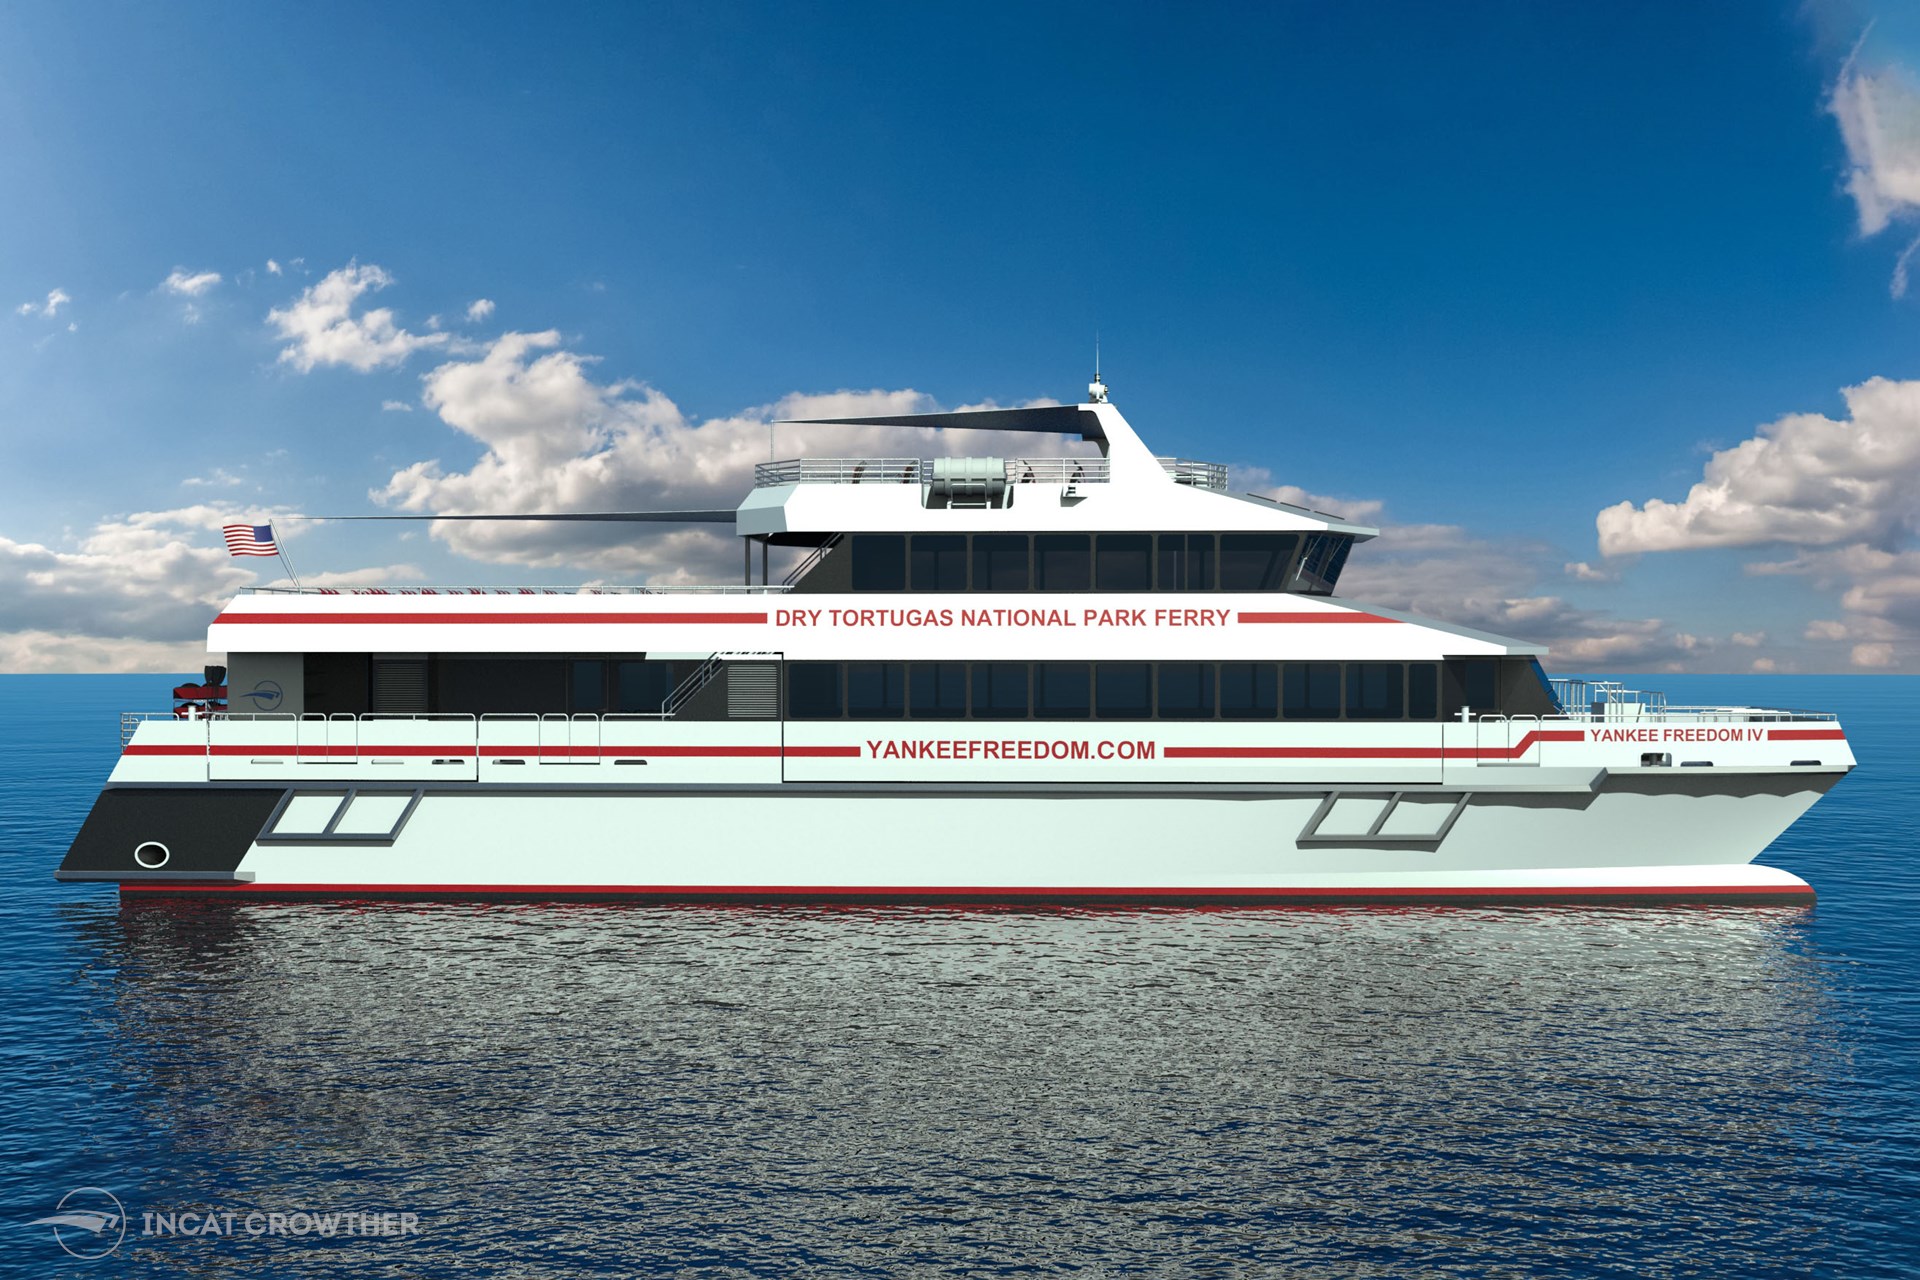 Incat Crowther To Design New Passenger Ferry For Busy Florida National Park Service